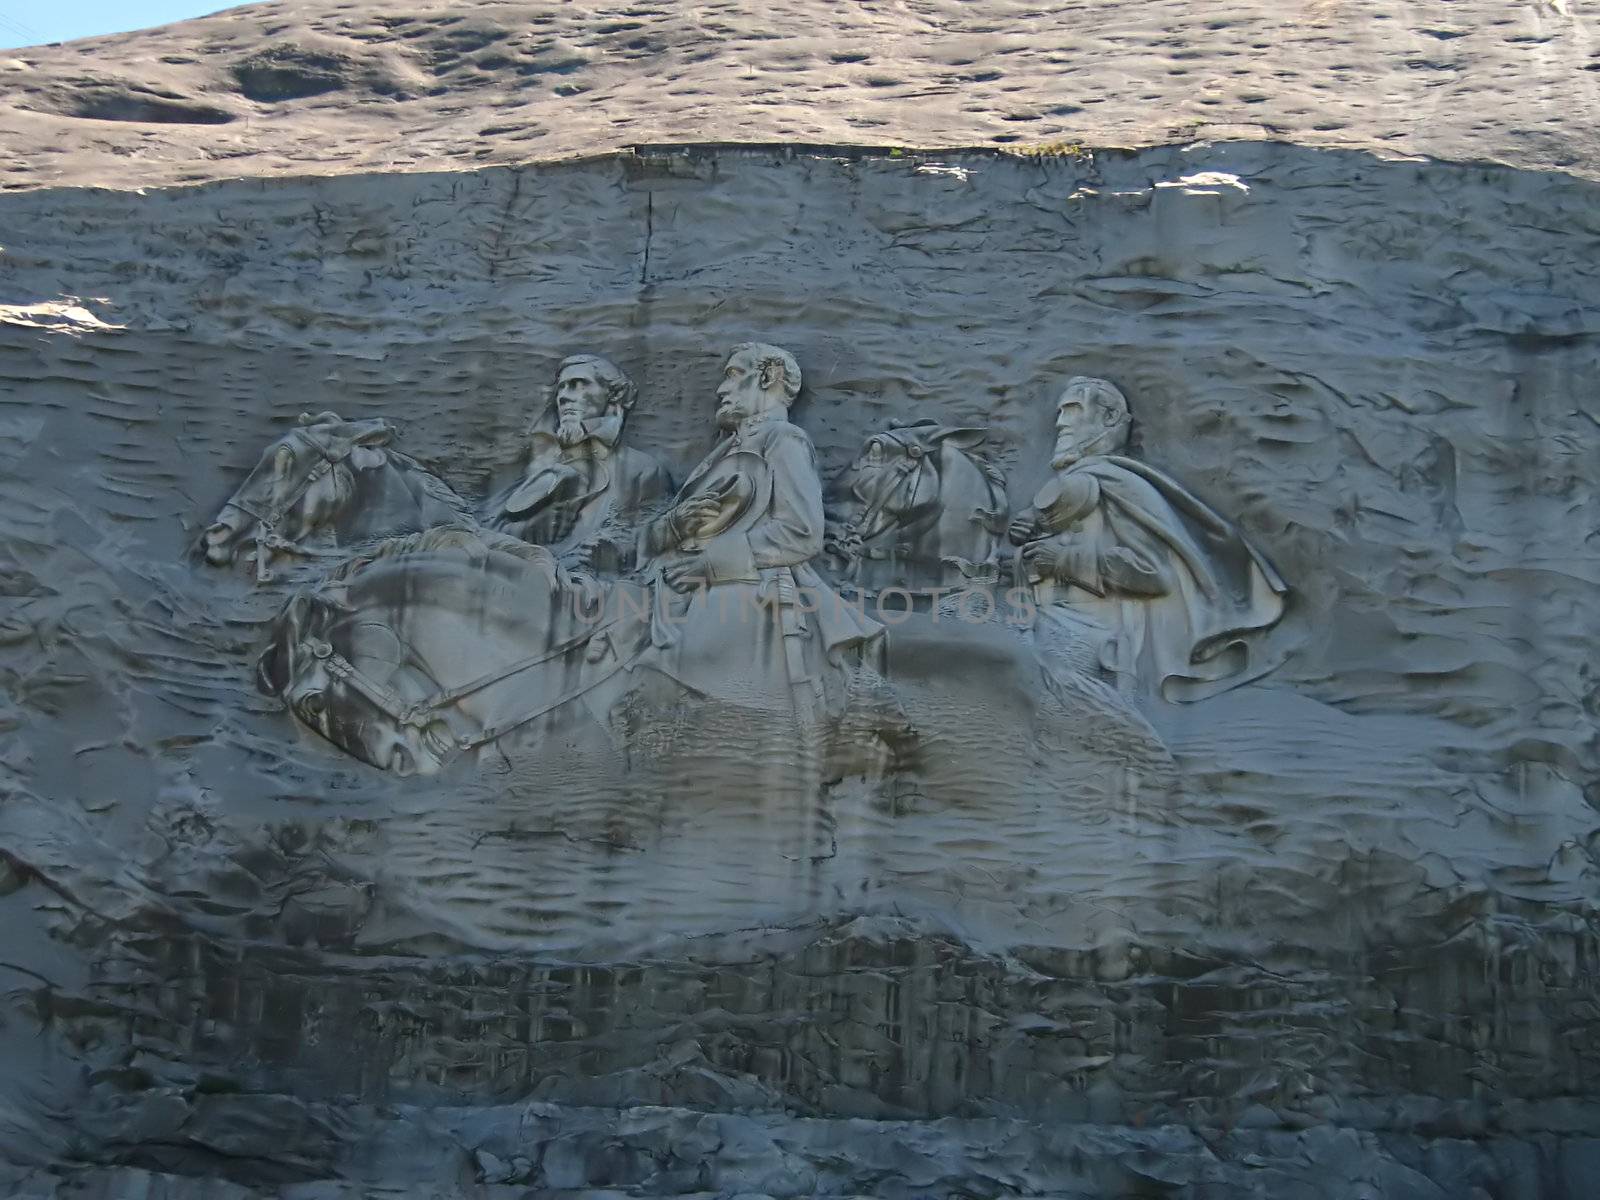 A photograph of the sculpture at Stone Mountain located near the city of Atlanta
in the state of Georgia in the United States. 
This carving is the largest bas relief sculpture in the world and shows Jefferson Davis 
(president of the U.S. Confederacy circa 1861 - 1865) and Confederate Generals Robert E. Lee 
and Thomas Jonathan "Stonewall" Jackson.